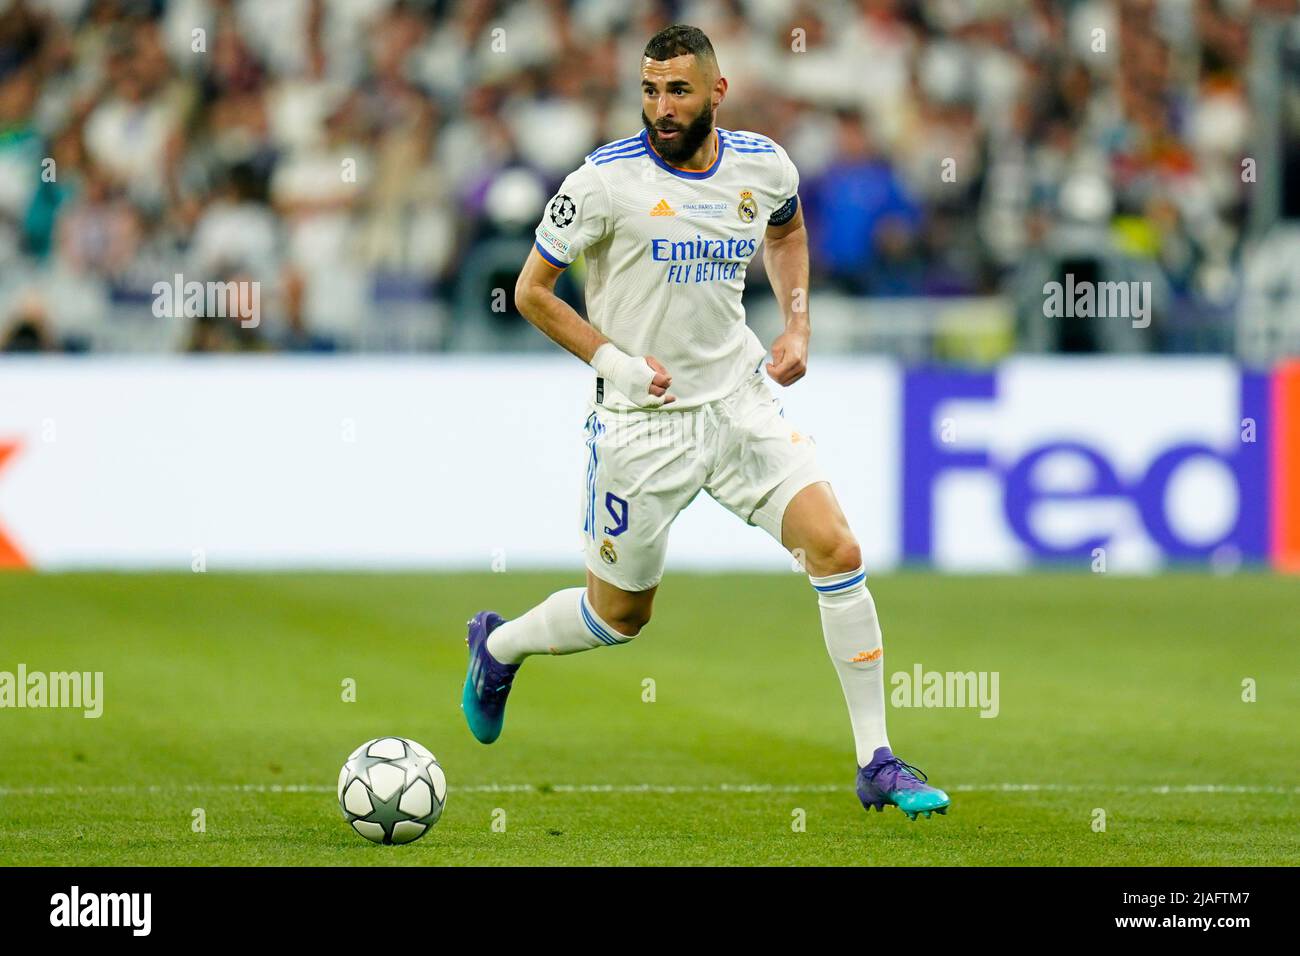 Karim Benzema of Real Madrid during the UEFA Champions League Final match between Liverpool FC and Real Madrid played at Stade de France on May 28, 2022 in Paris, France. (Photo / Magma) Stock Photo